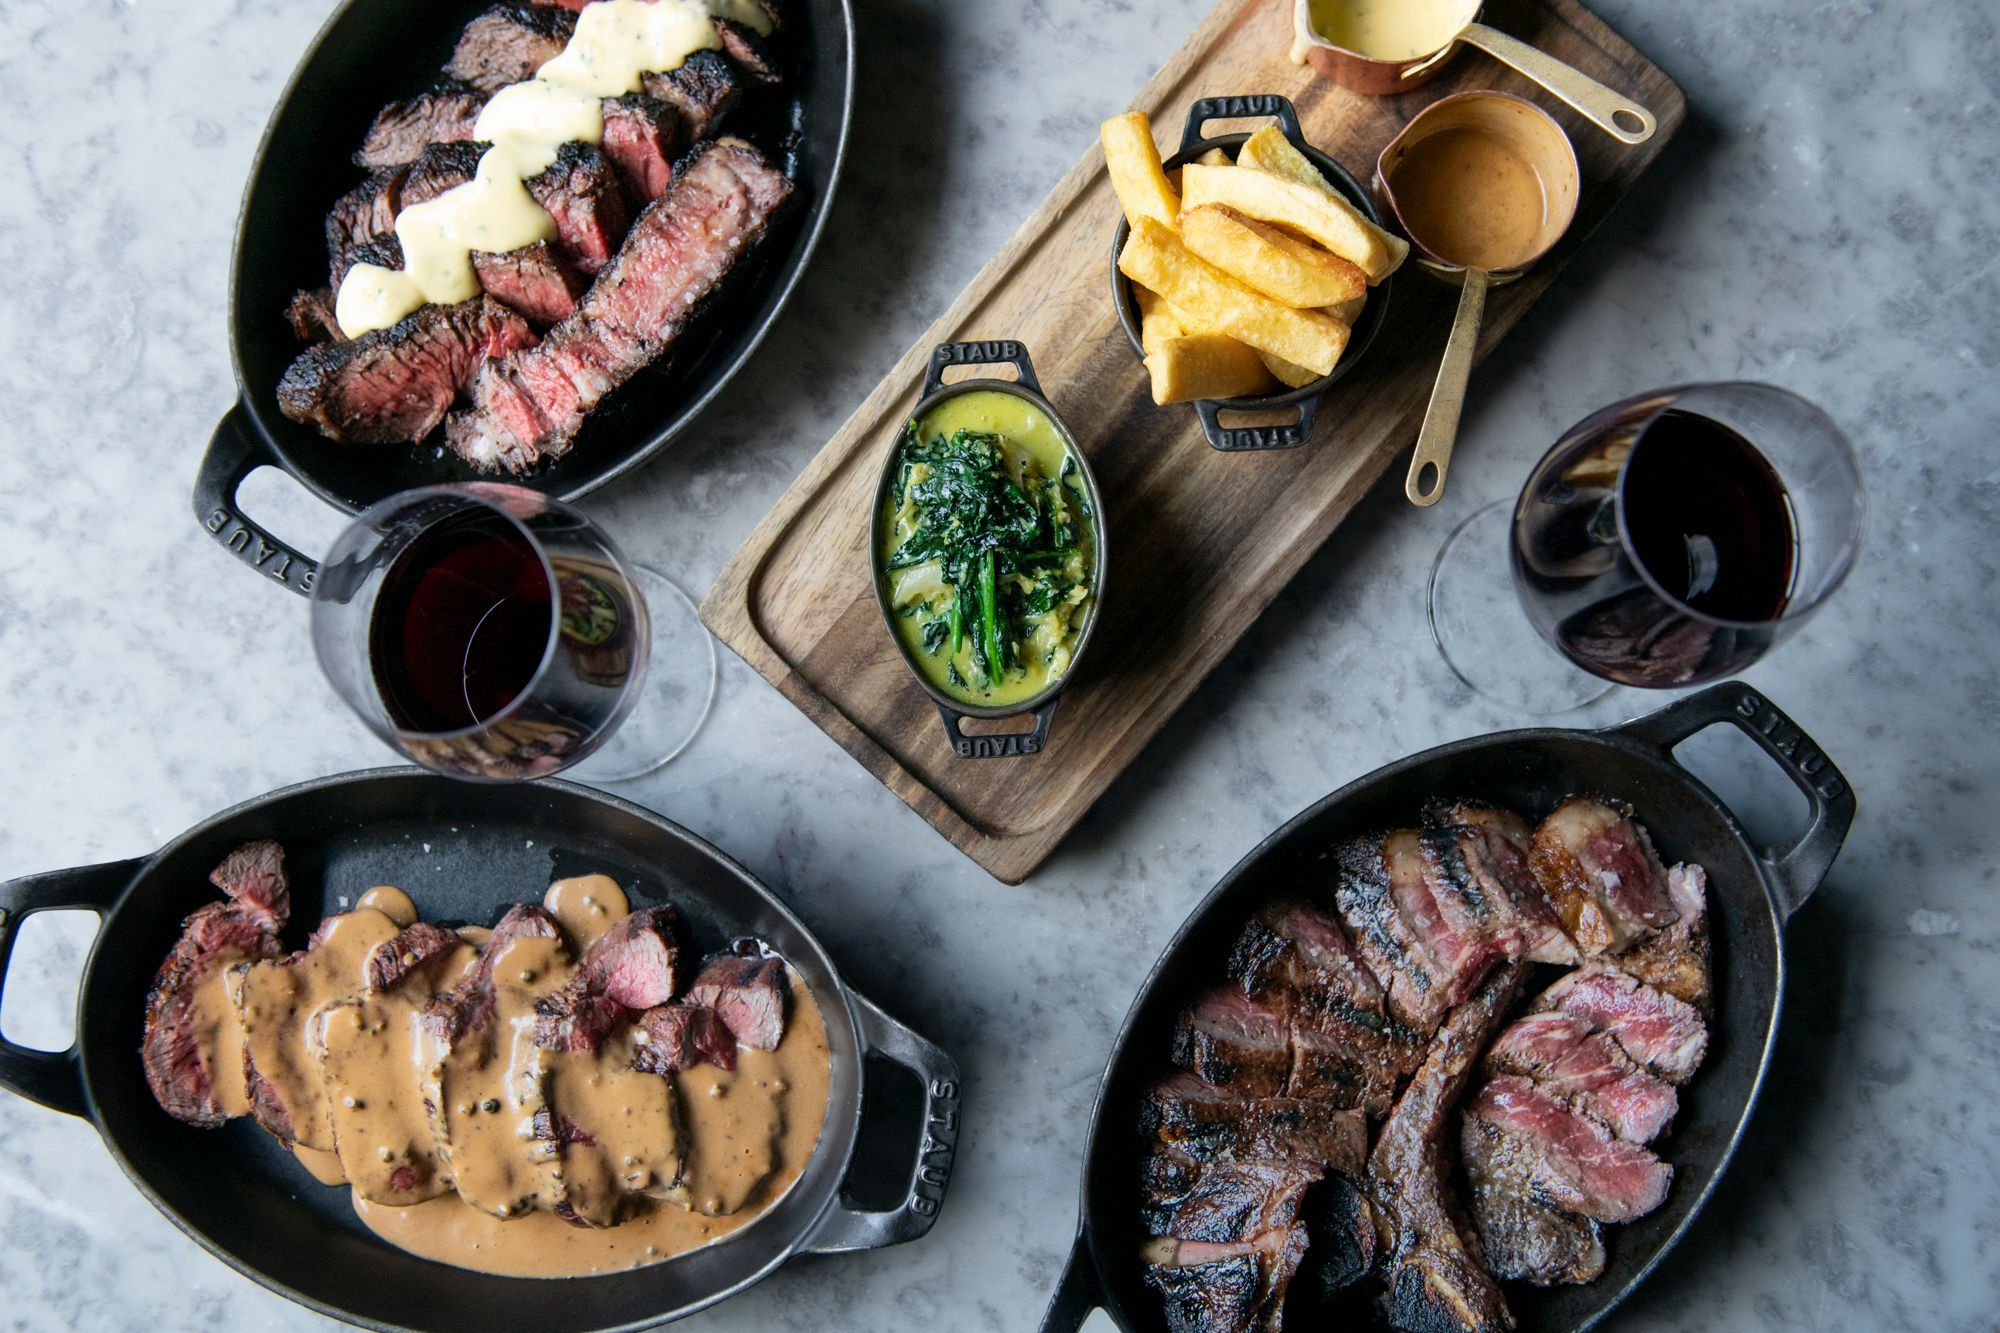 An overhead shot of a table of food. Three black iron dishes with sliced steak cooked rare and seared to perfection. Two glasses of red wine and a board with chips and vegetables accompany the meal.